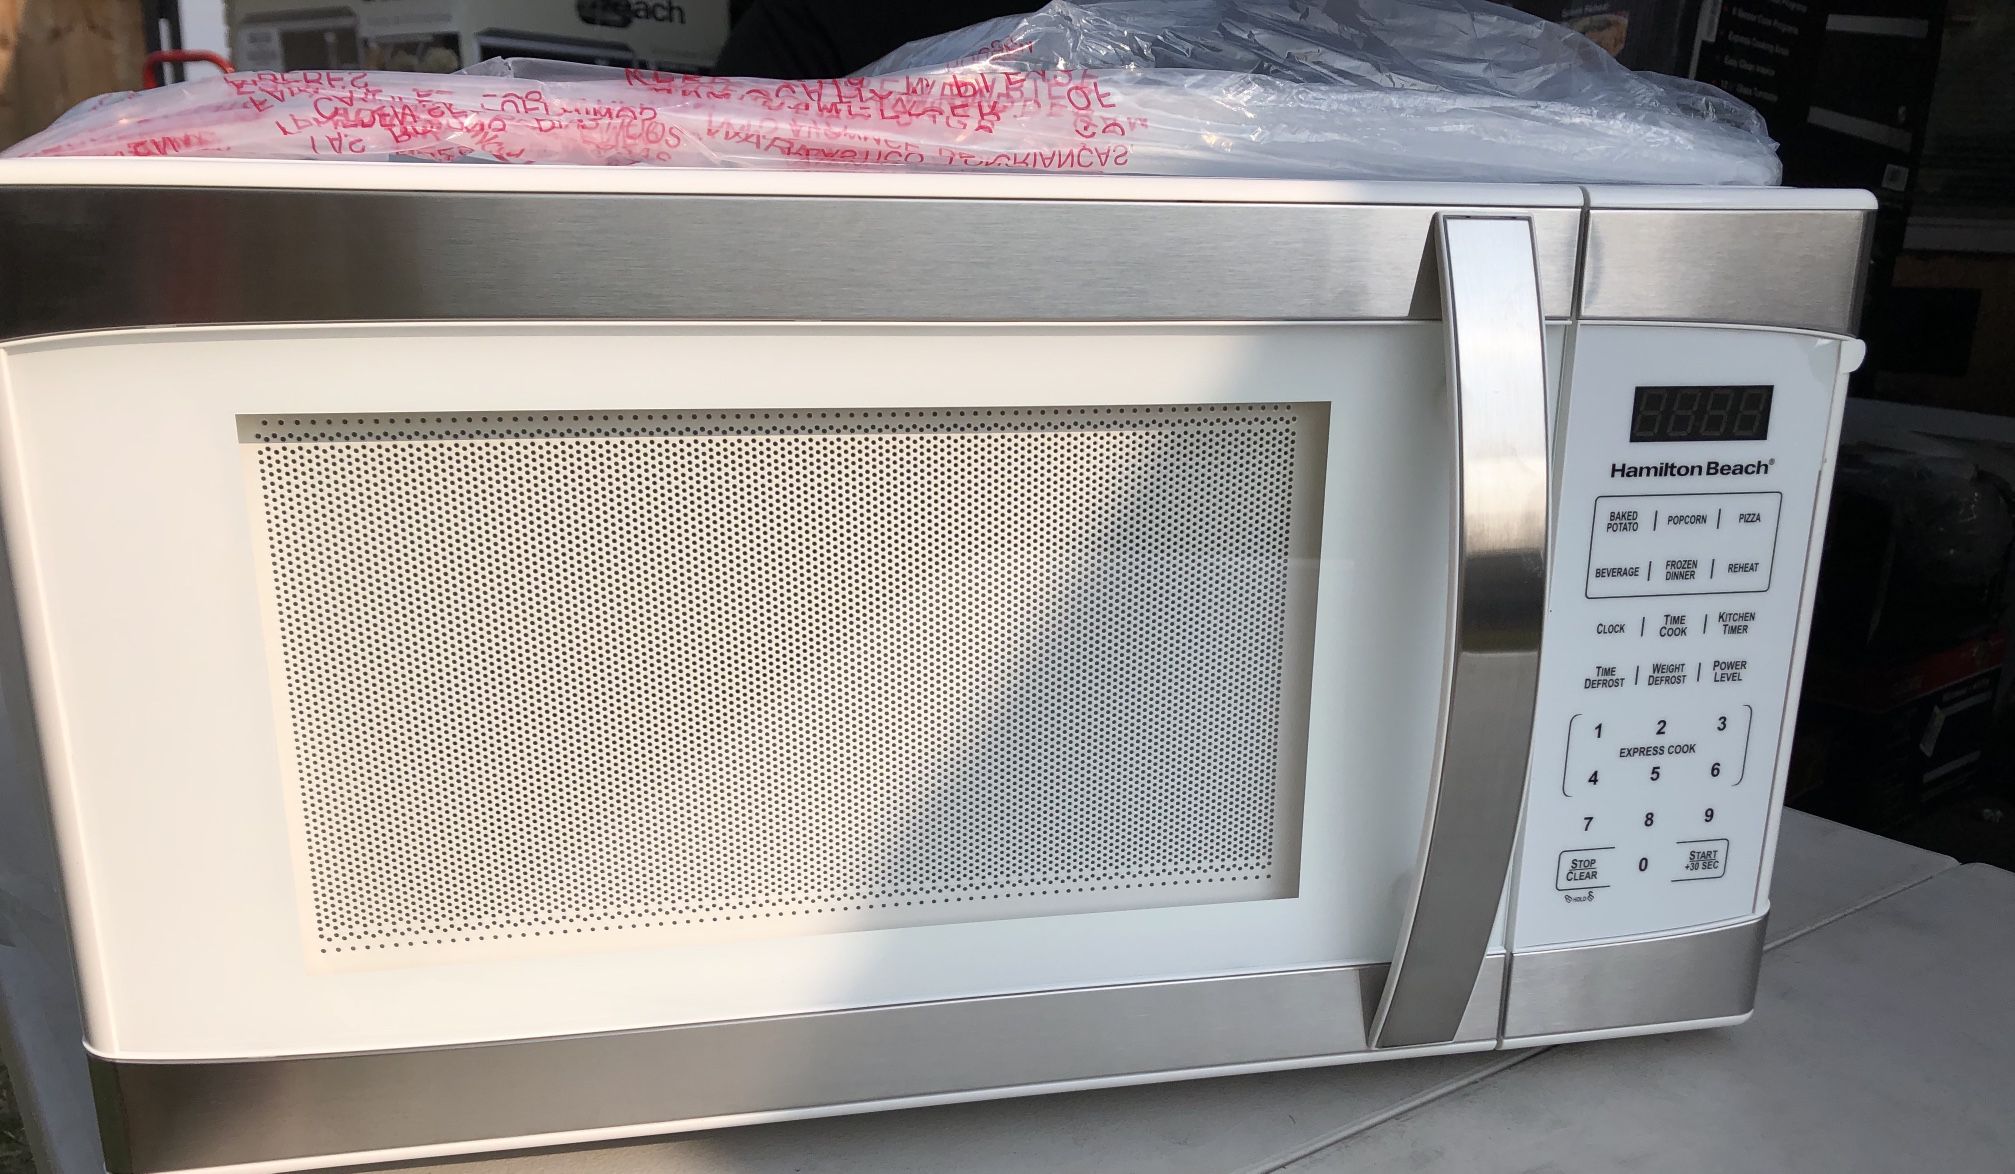 Hamilton Beach Microwave White/stainless Steel for Sale in Rialto, CA